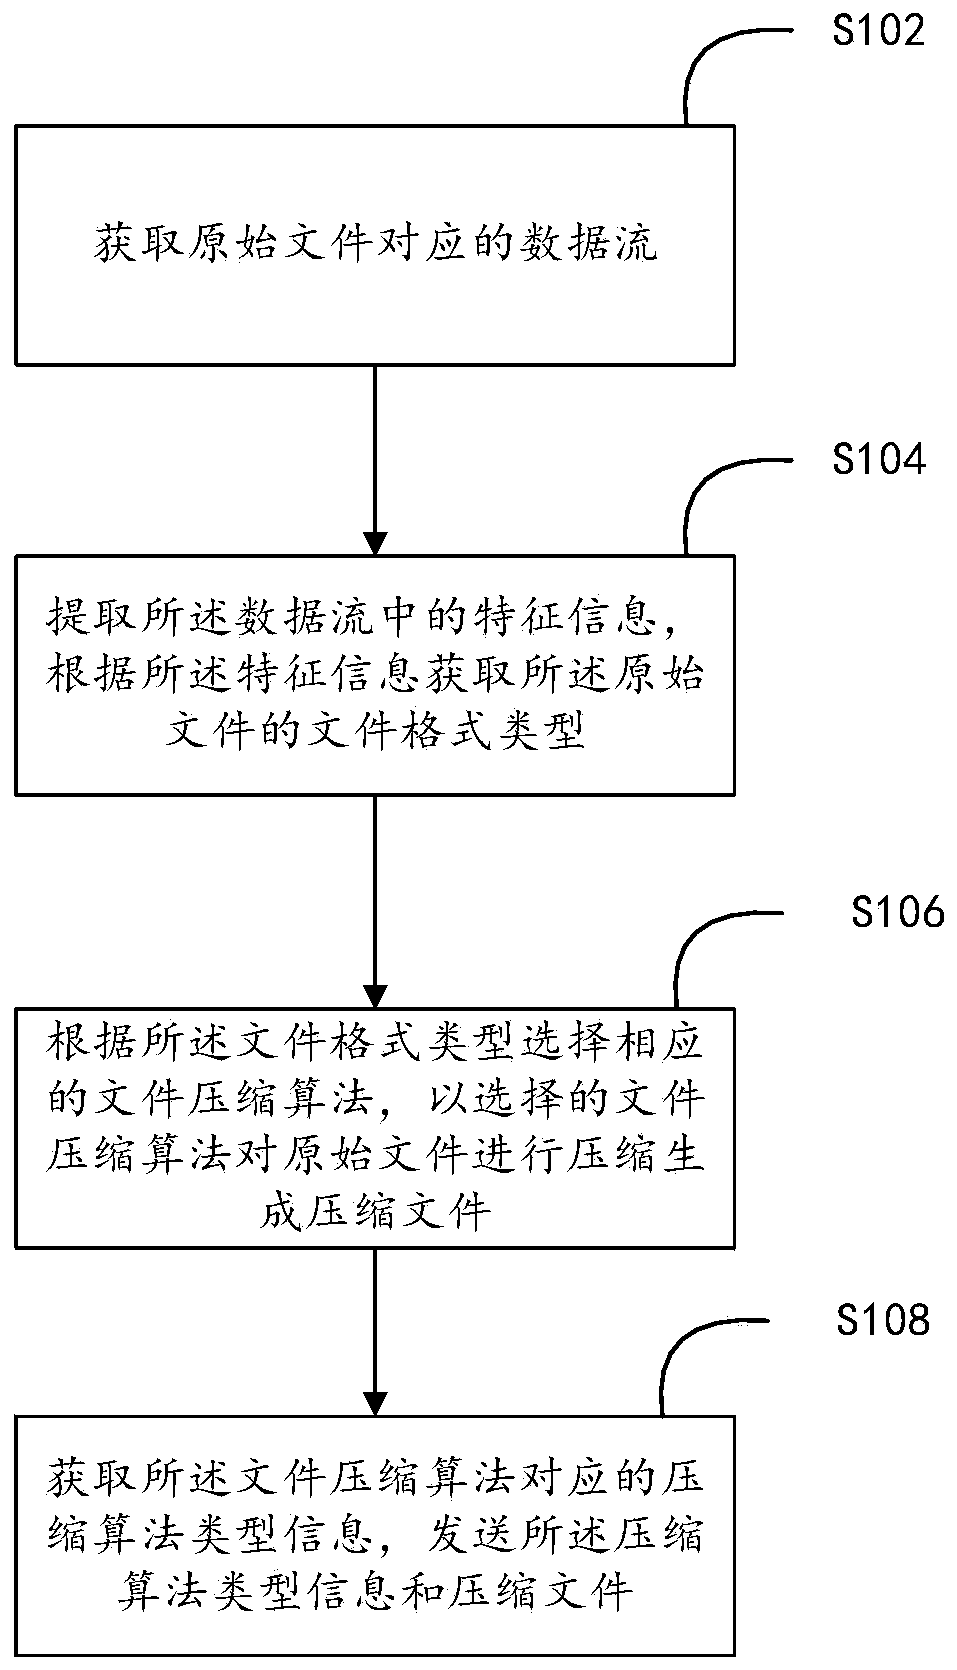 Document transmission method and device